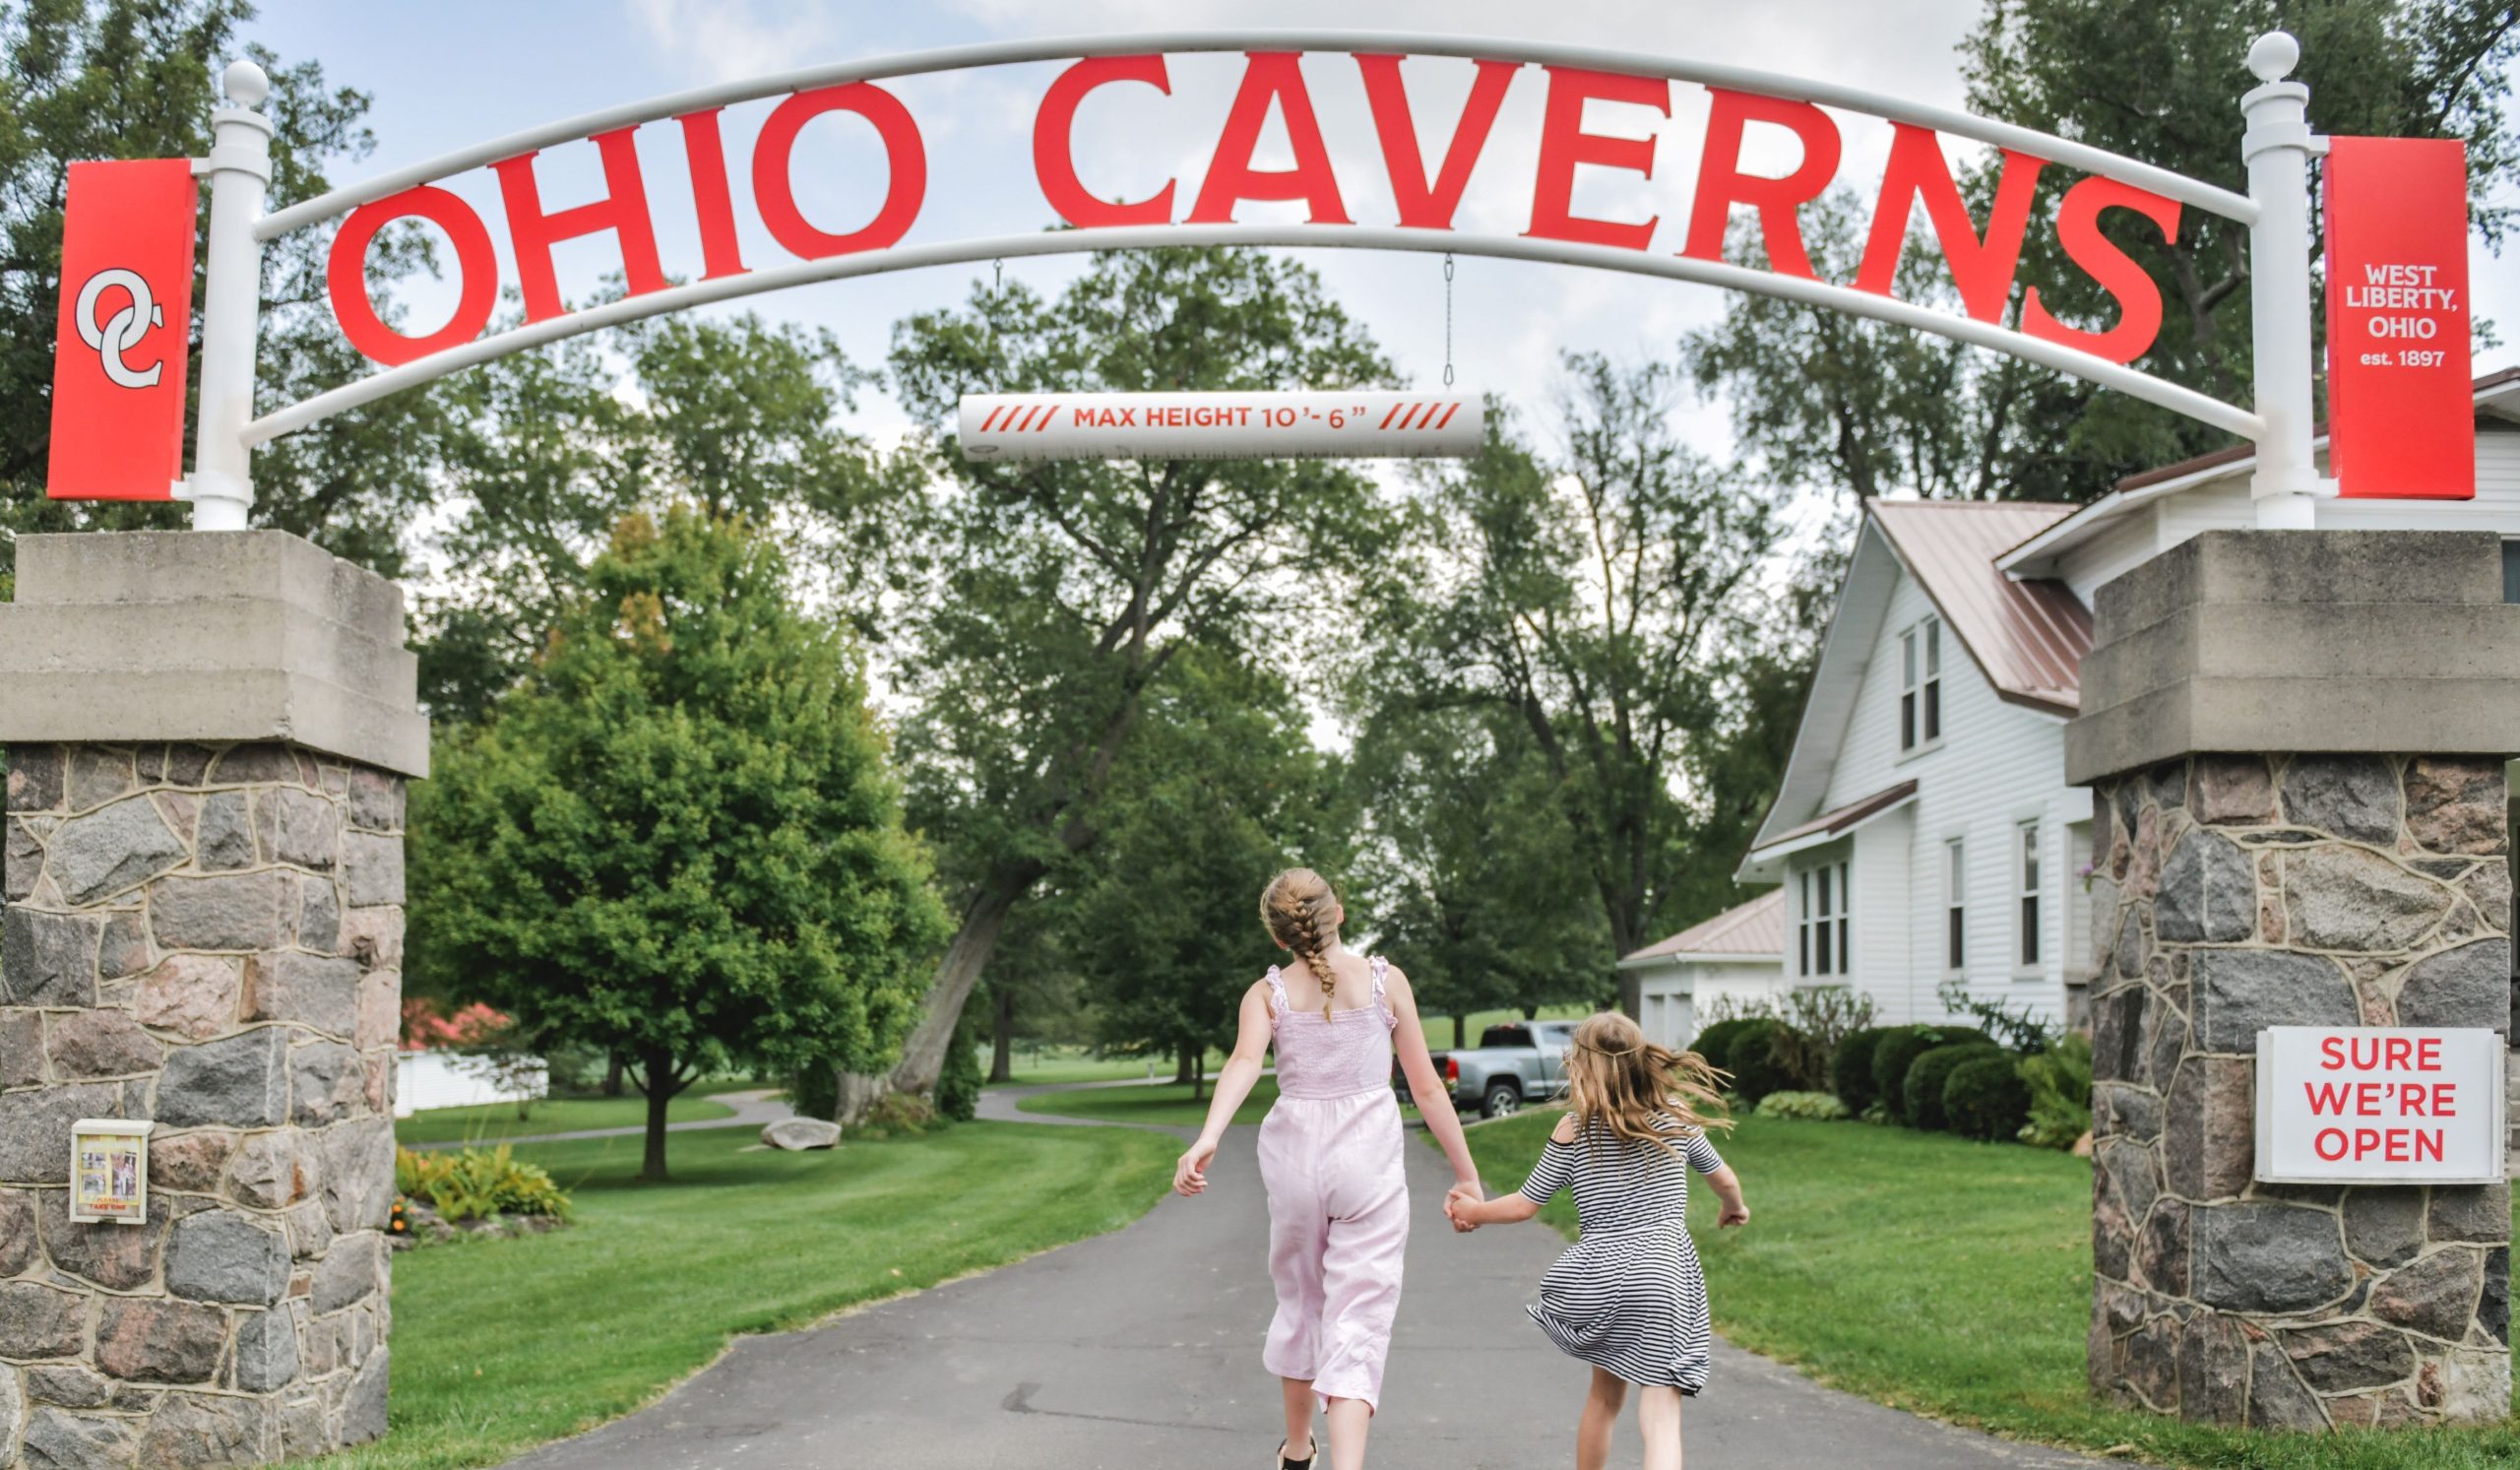 Discover the Wonders of Ohio Caverns: America’s Most Colorful Caverns